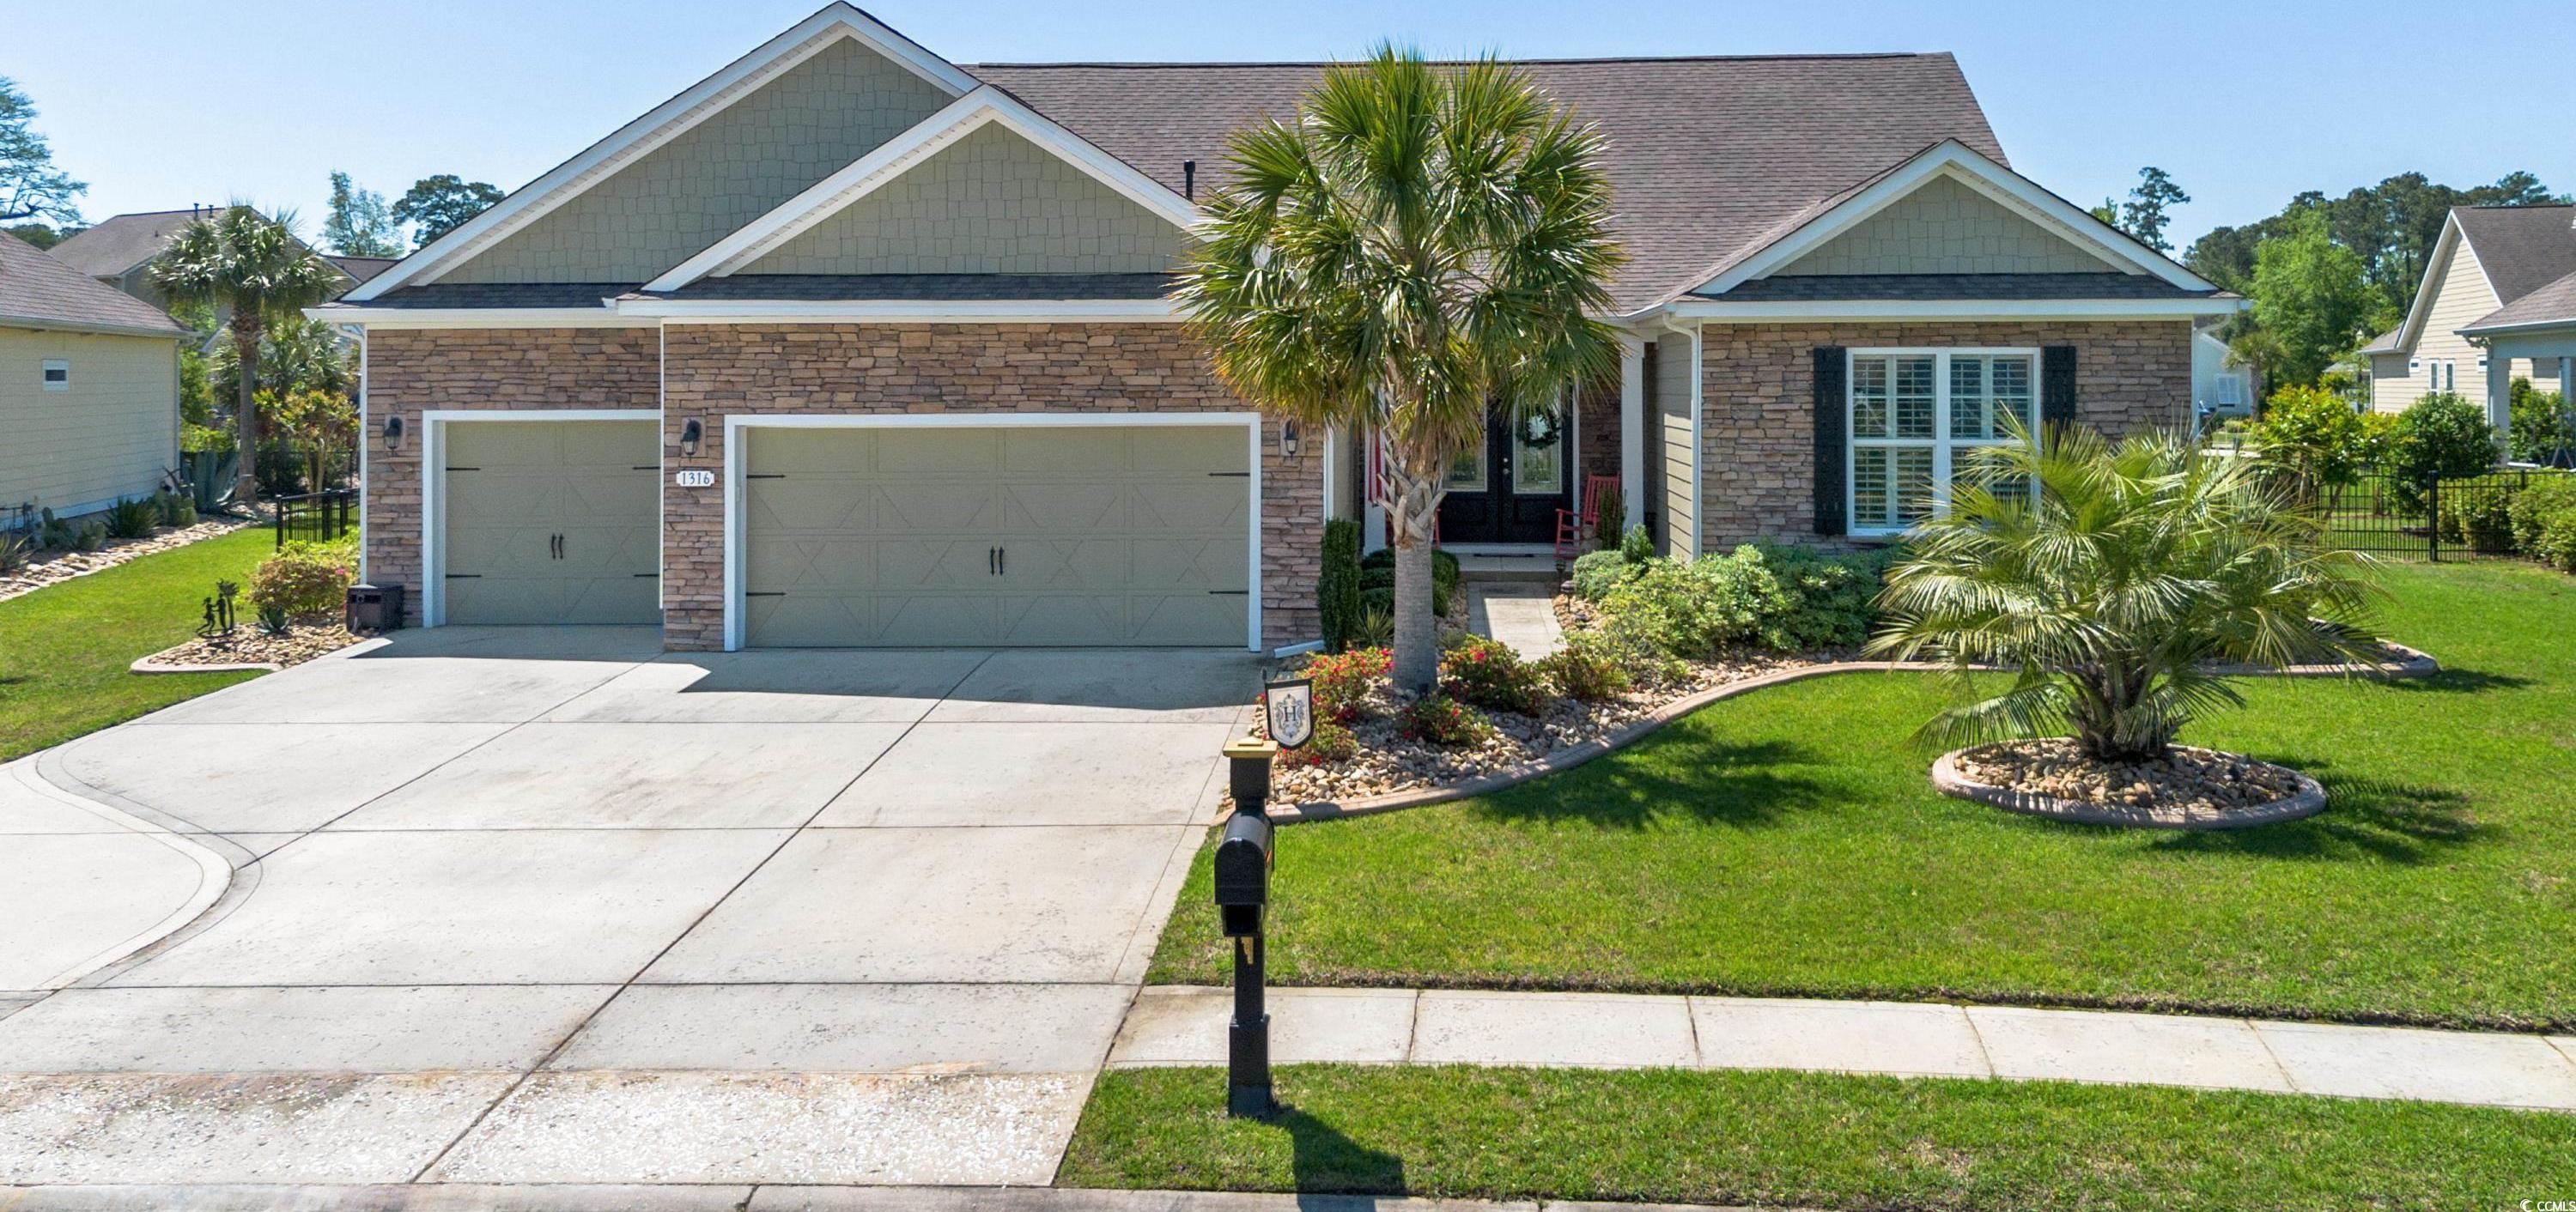 Photo one of 1316 East Island Dr. North Myrtle Beach SC 29582 | MLS 2409685